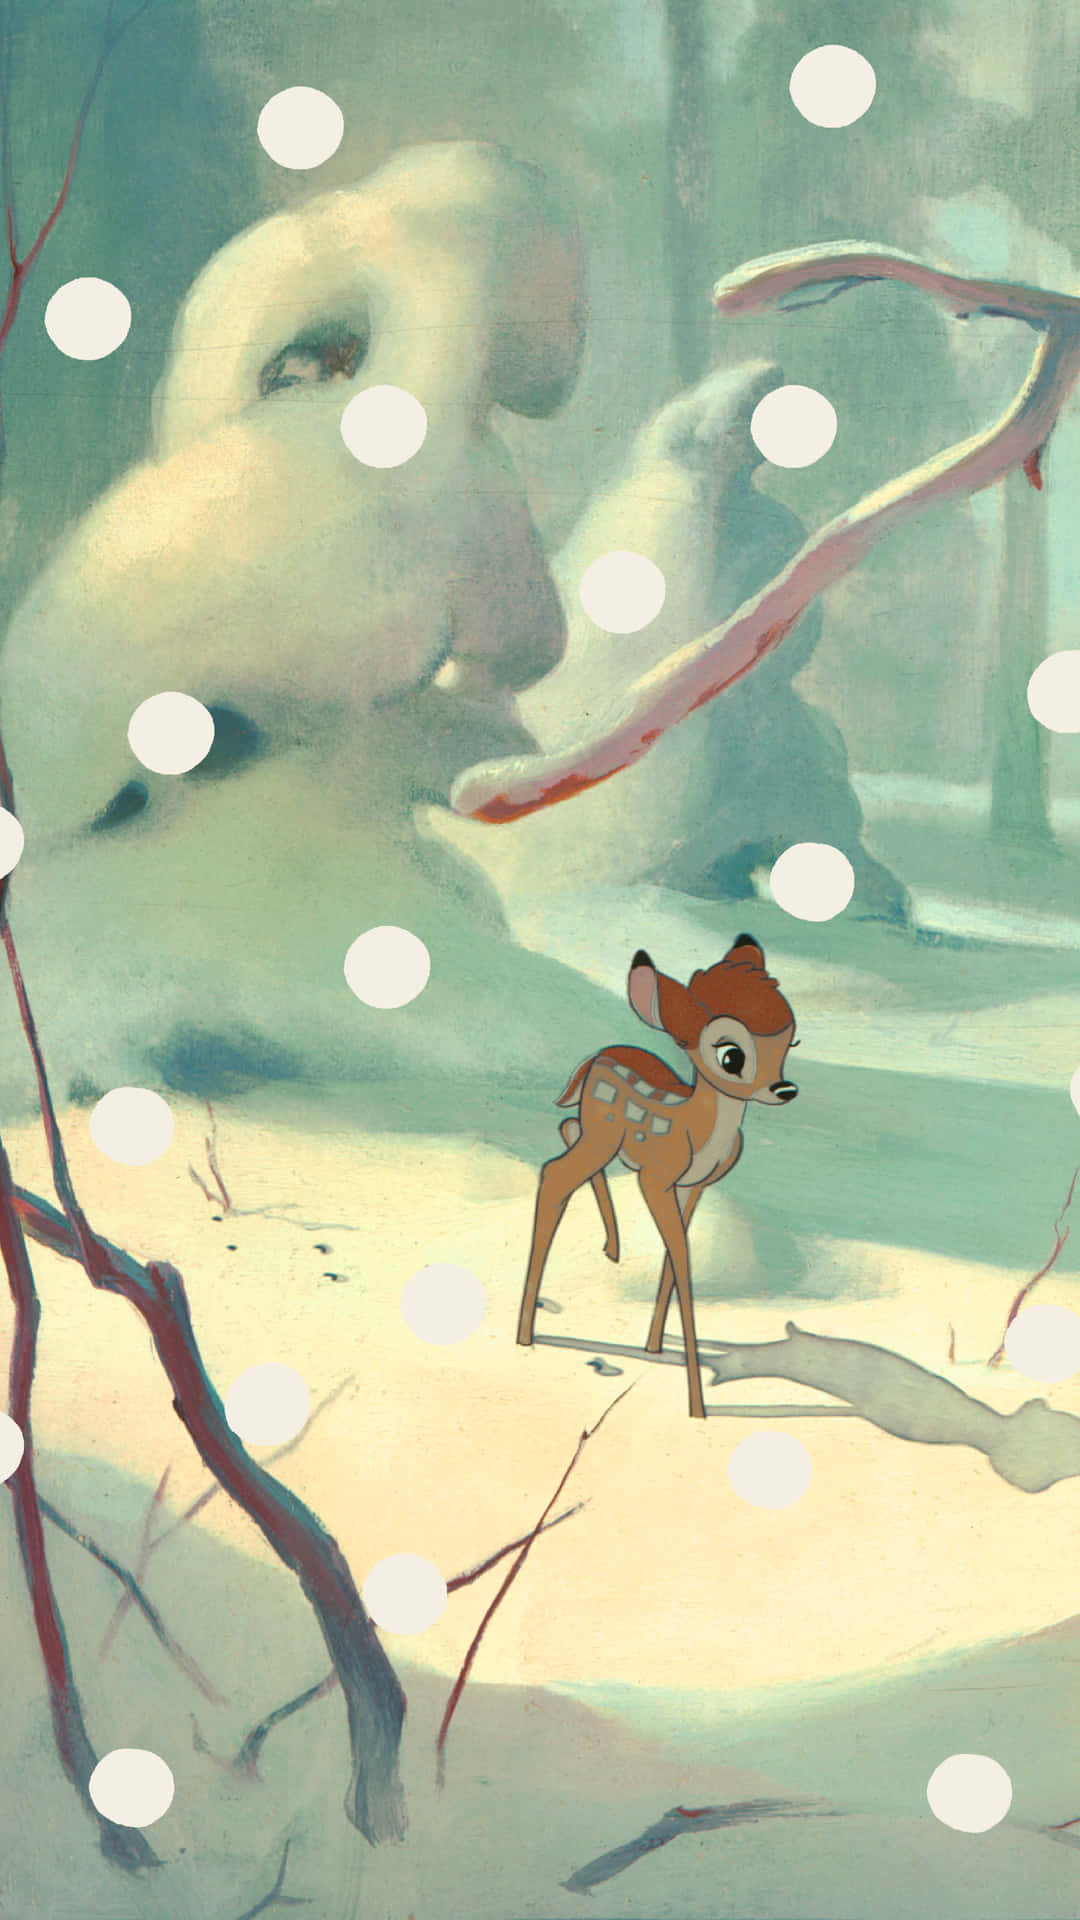 Bambi is ready to explore and make new friends in the forest